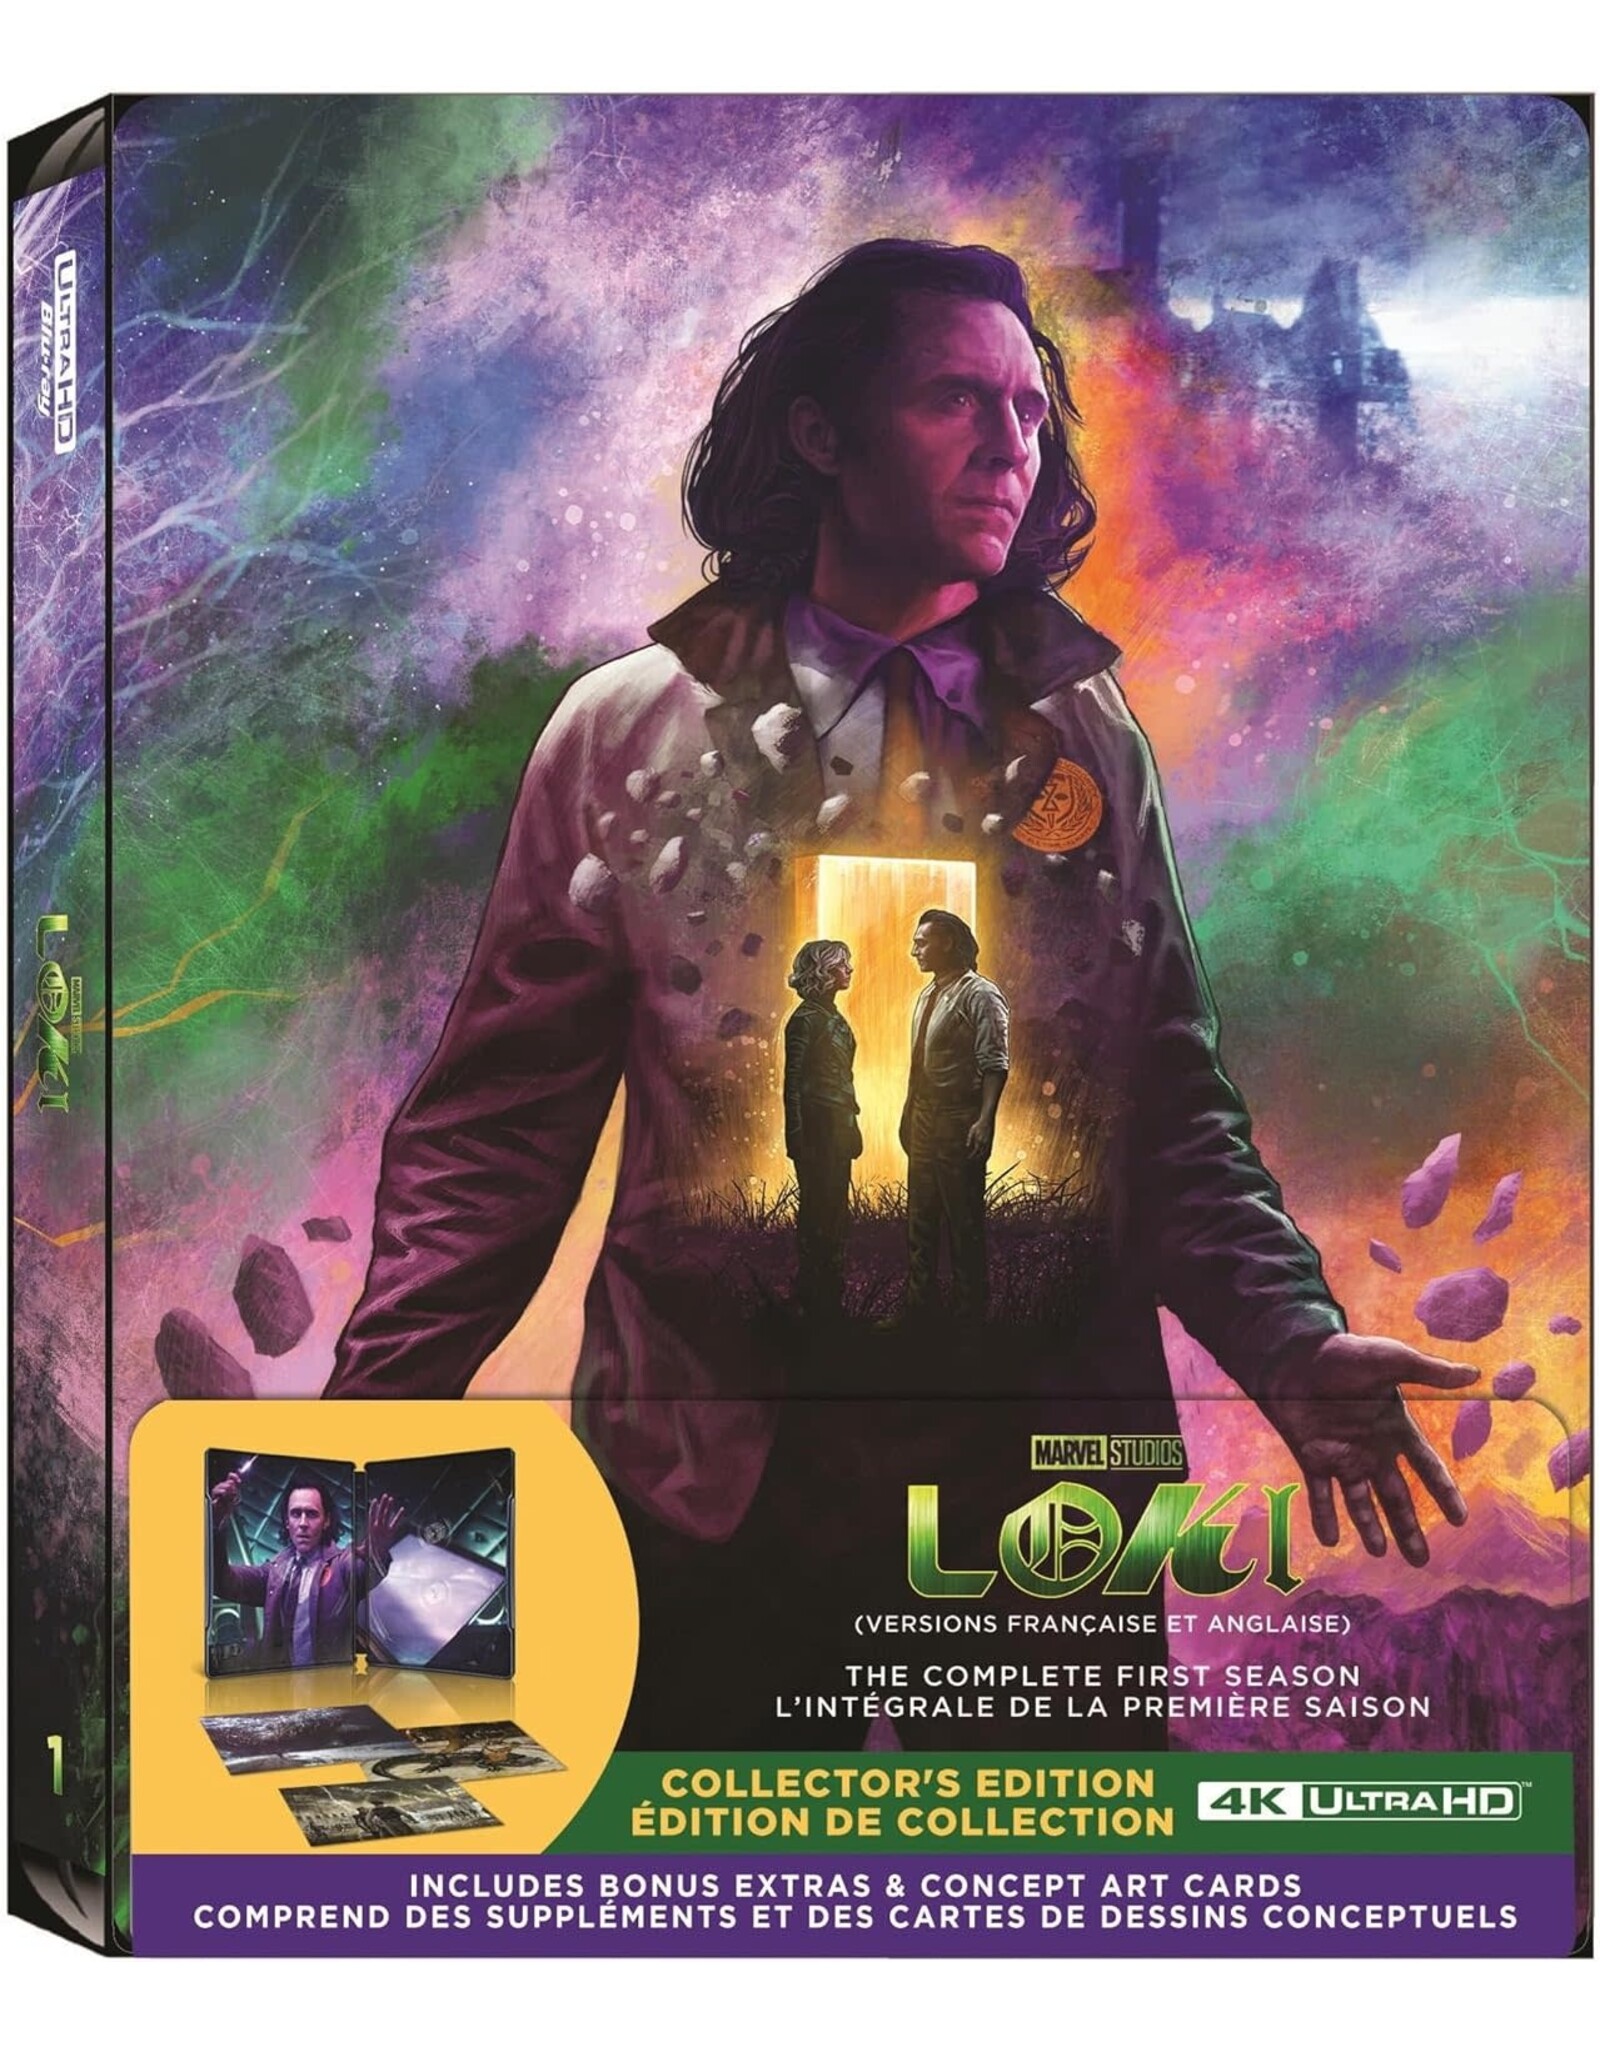 Cult & Cool Loki The Complete First Season - 4K UHD Limited Edition Steelbook (Brand New)